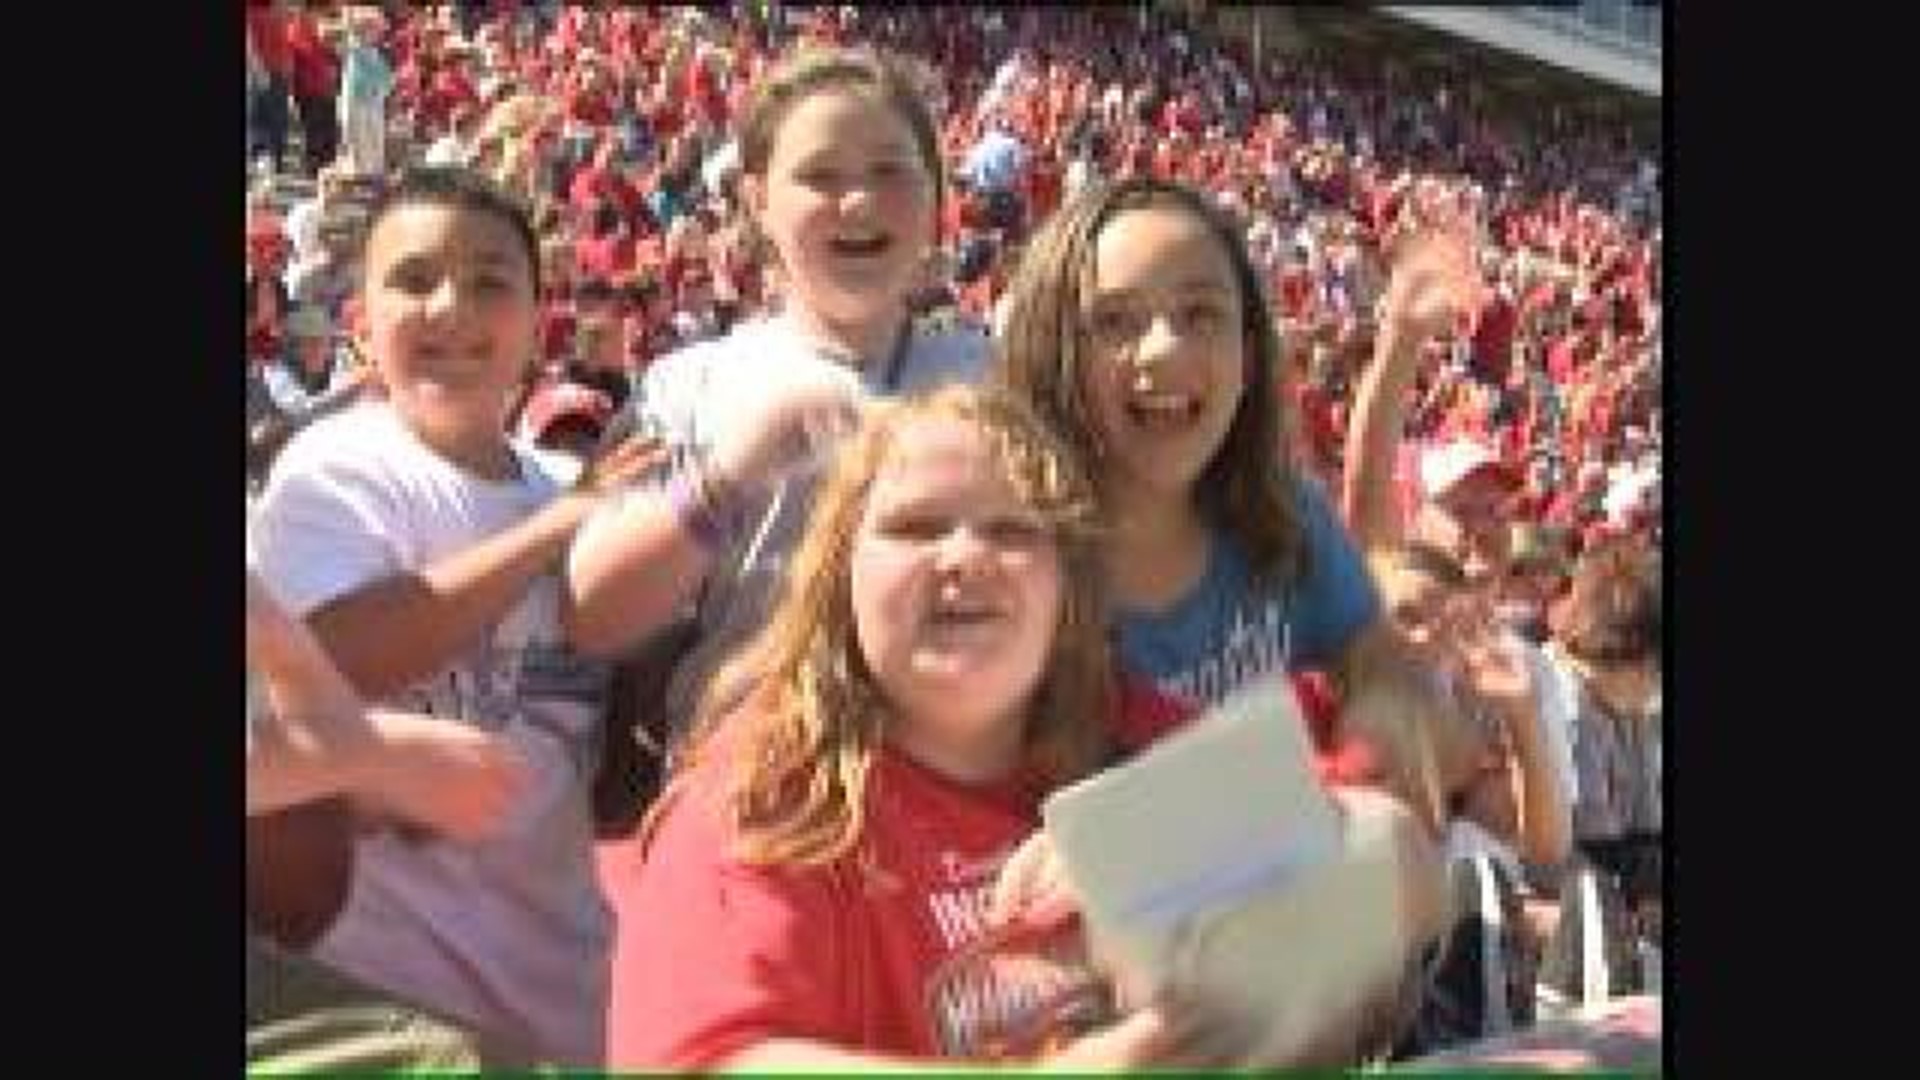 Fans Pumped at Red-White Game